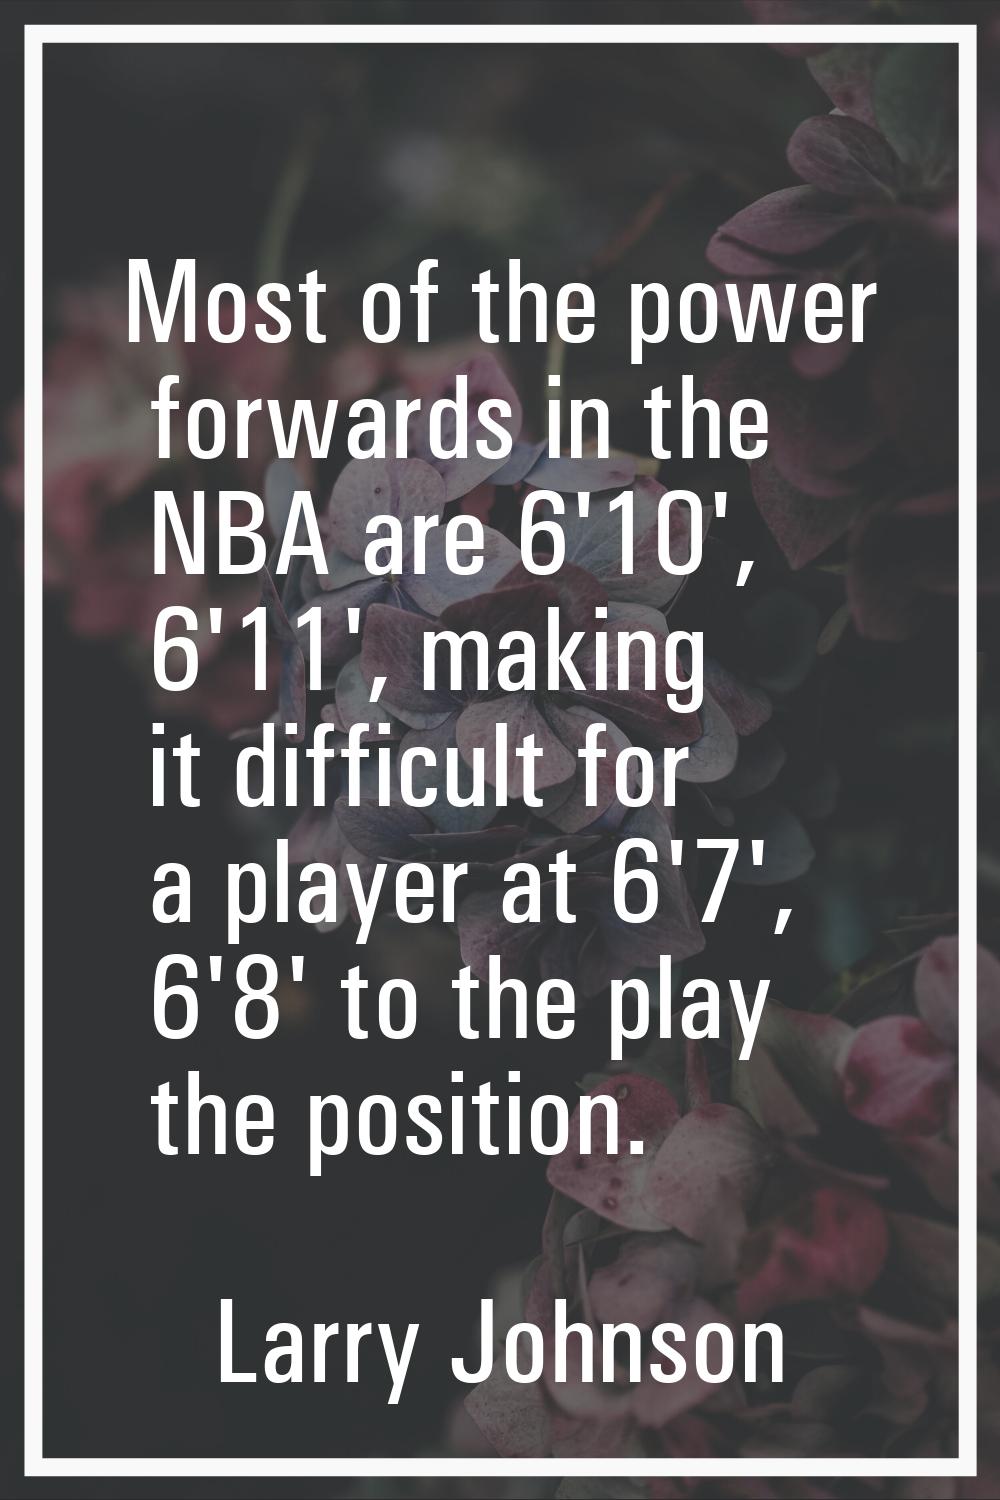 Most of the power forwards in the NBA are 6'10', 6'11', making it difficult for a player at 6'7', 6